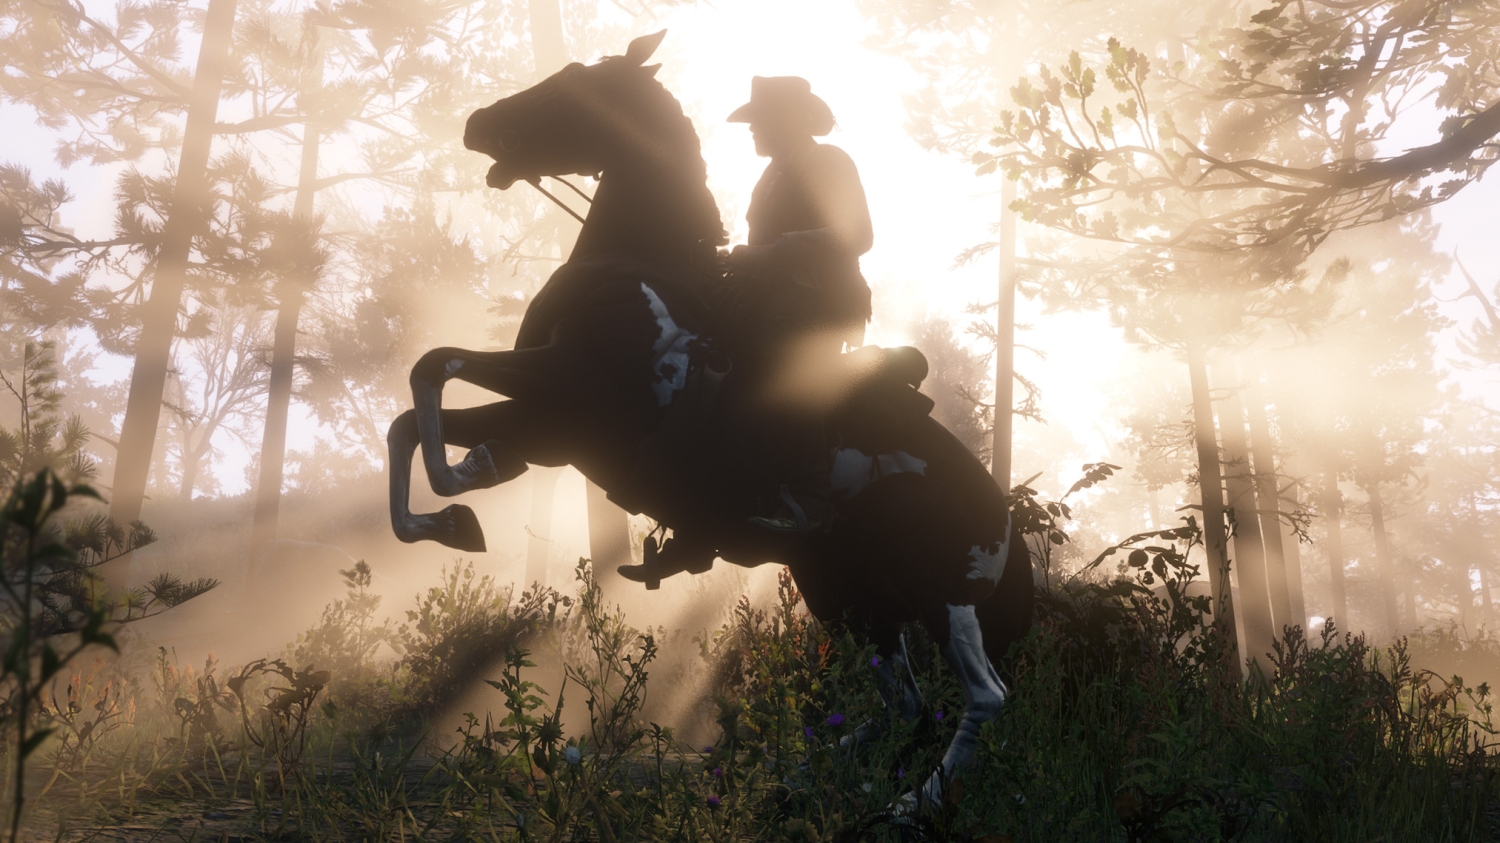 Updated] RDR2 Update 1.14 Released for PC/PS4/XO; Addresses Stalling on  4-Core and 6-Core CPUs Alongside Crashes